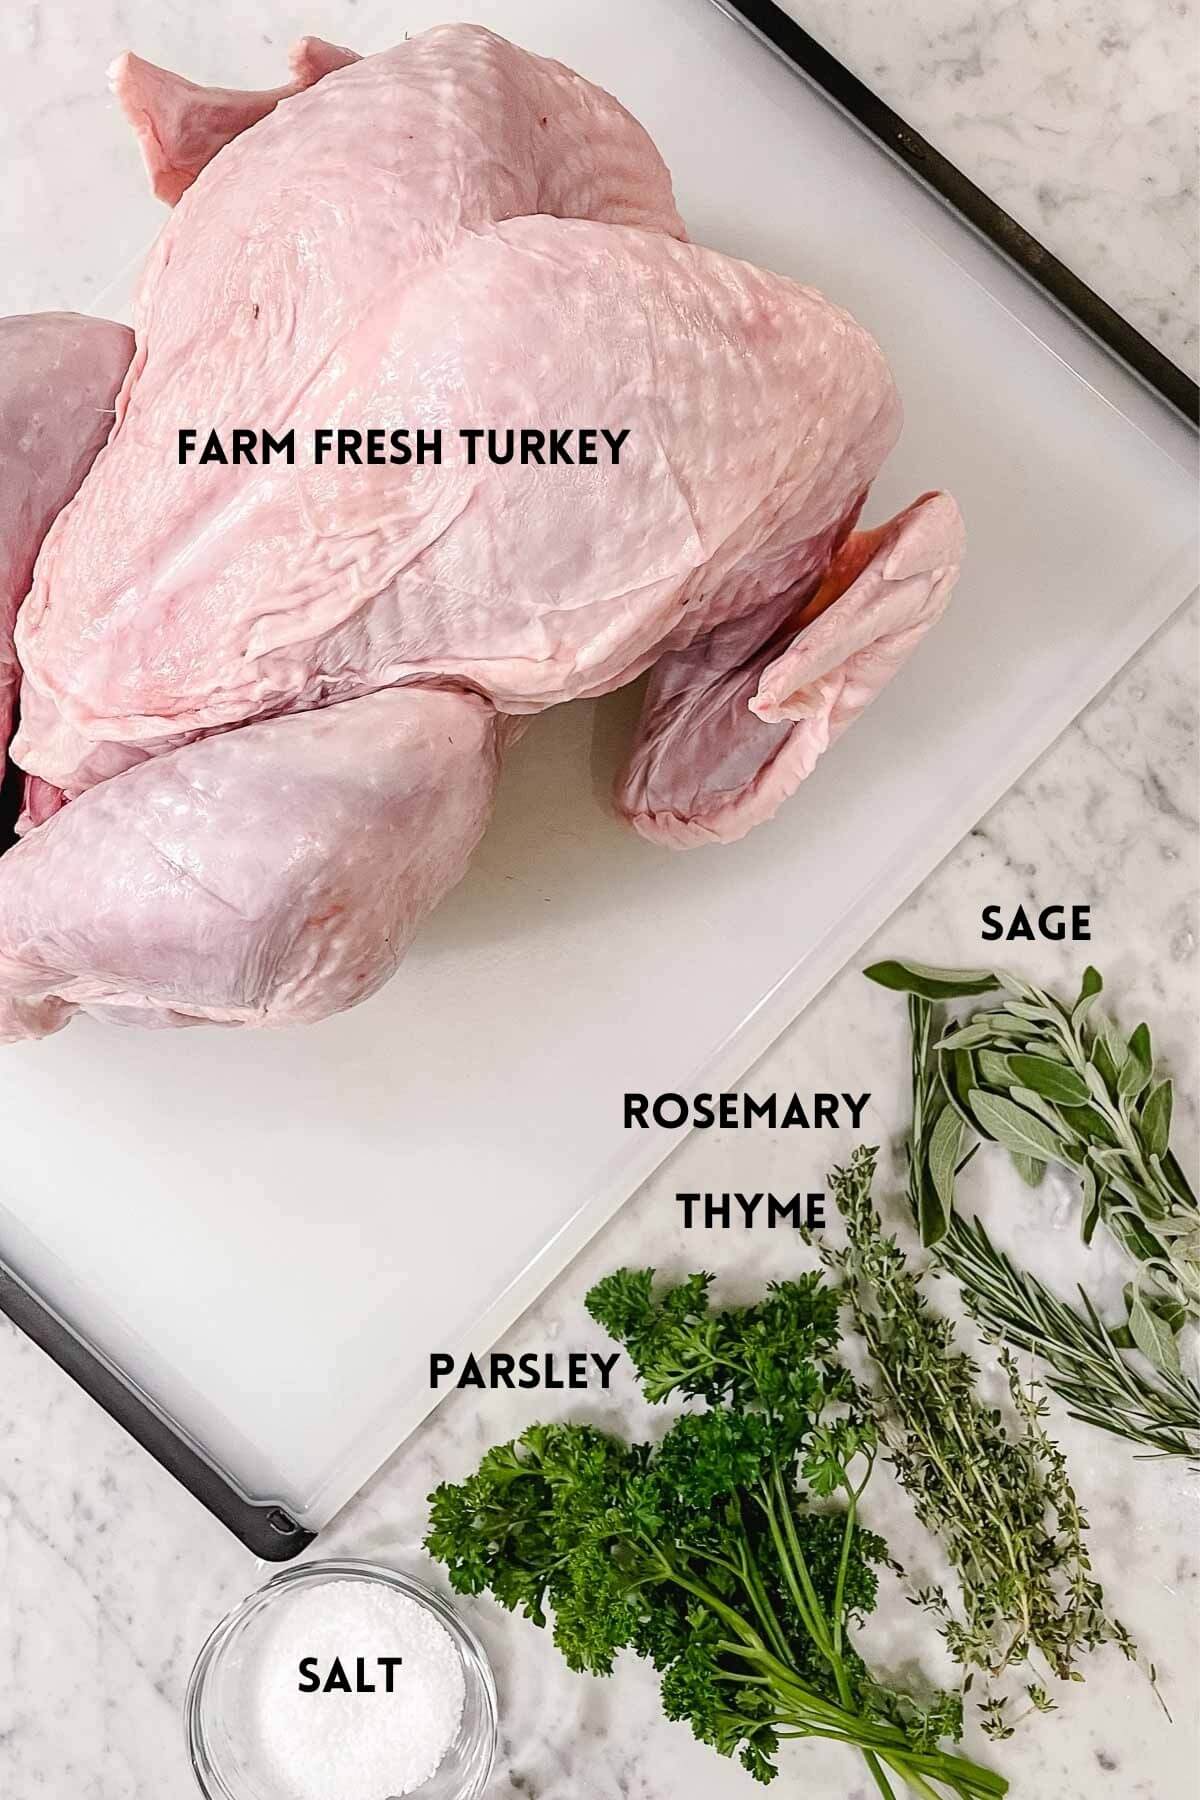 Ingredients needed for making a smoked turkey including a whole turkey, herbs, and salt.